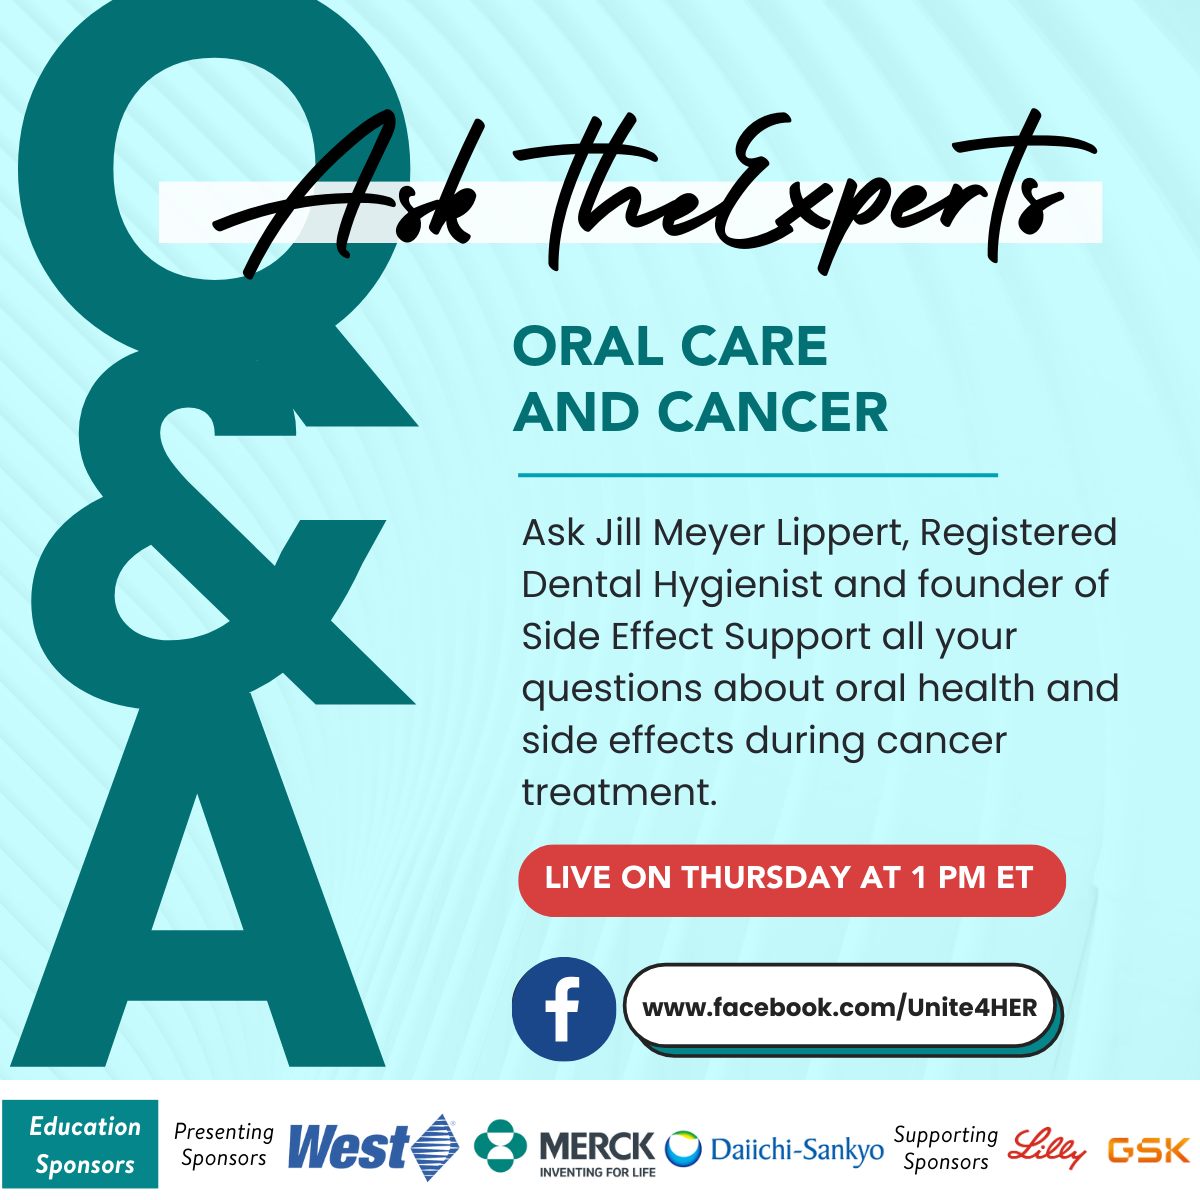 Unite for HER highlights oral care and cancer in their Ask the Experts series